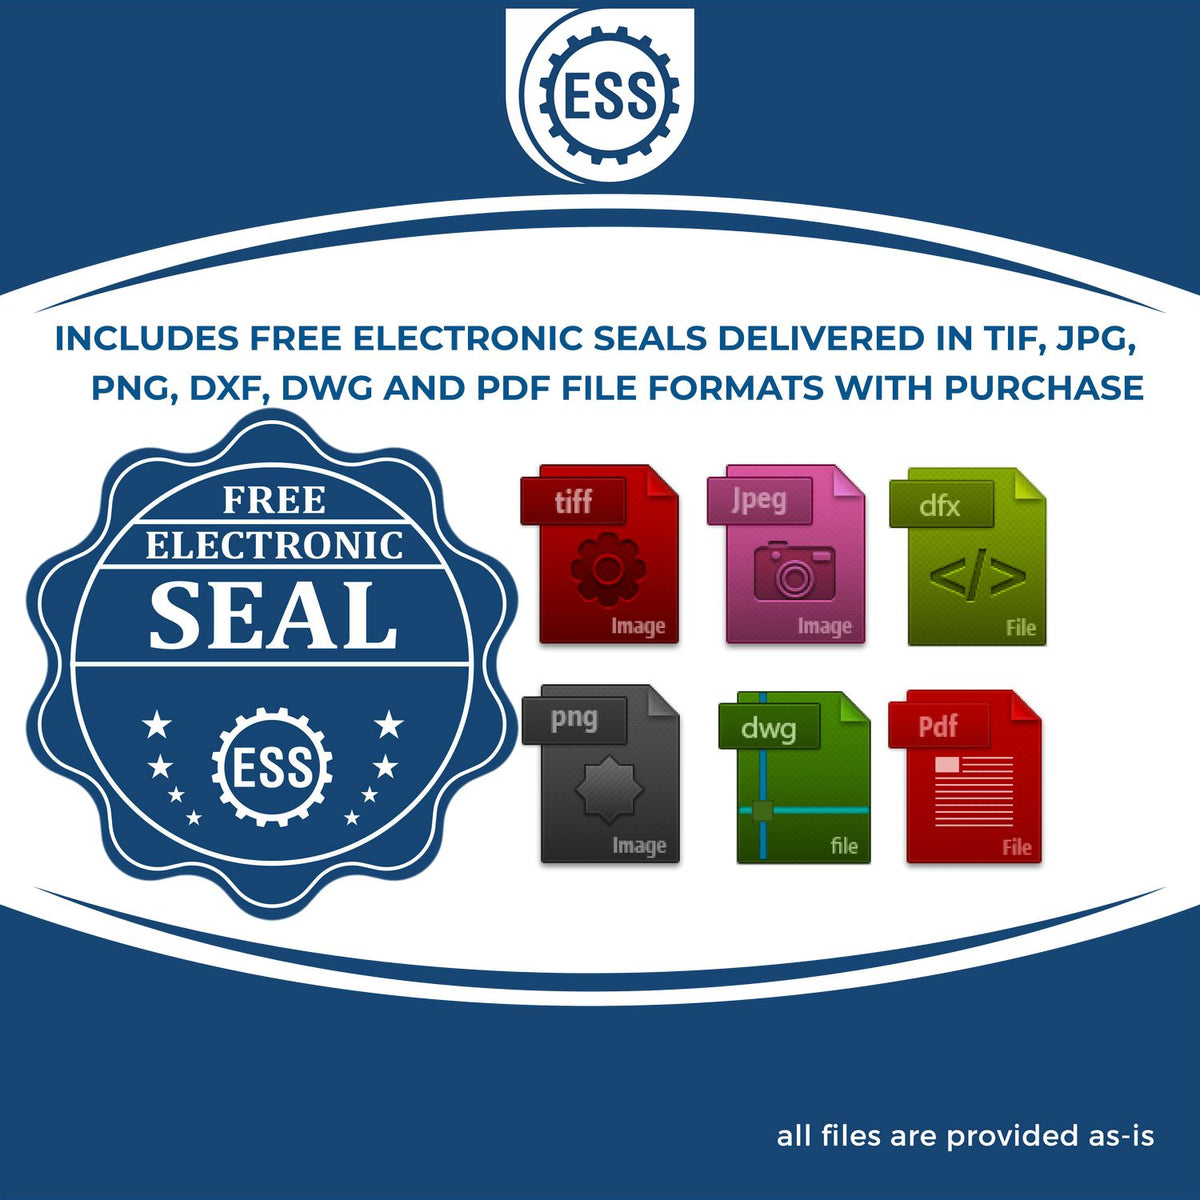 An infographic for the free electronic seal for the Florida Professional Geologist Seal Stamp illustrating the different file type icons such as DXF, DWG, TIF, JPG and PNG.